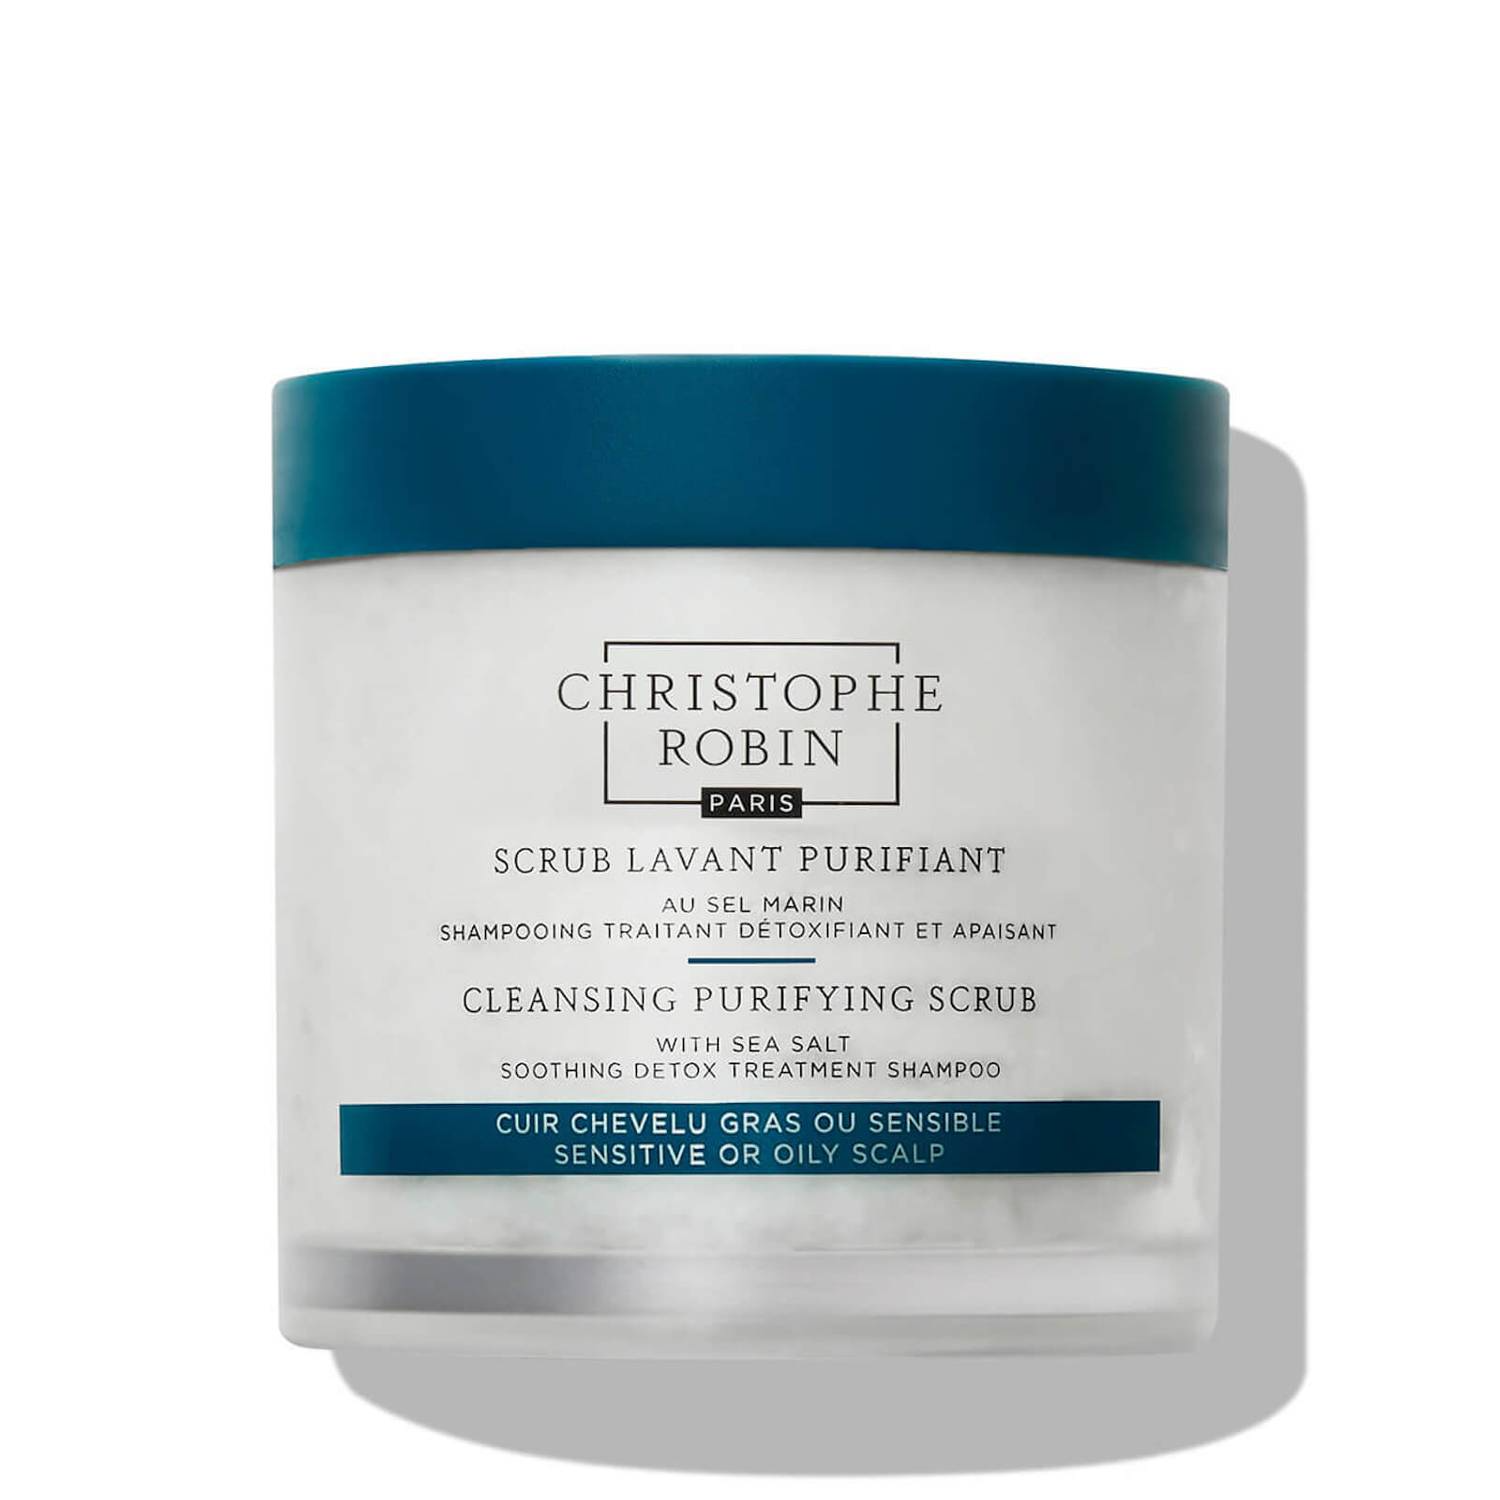 18.CHRISTOPHE ROBIN Cleansing Purifying Scrub With Sea Salt €39,  